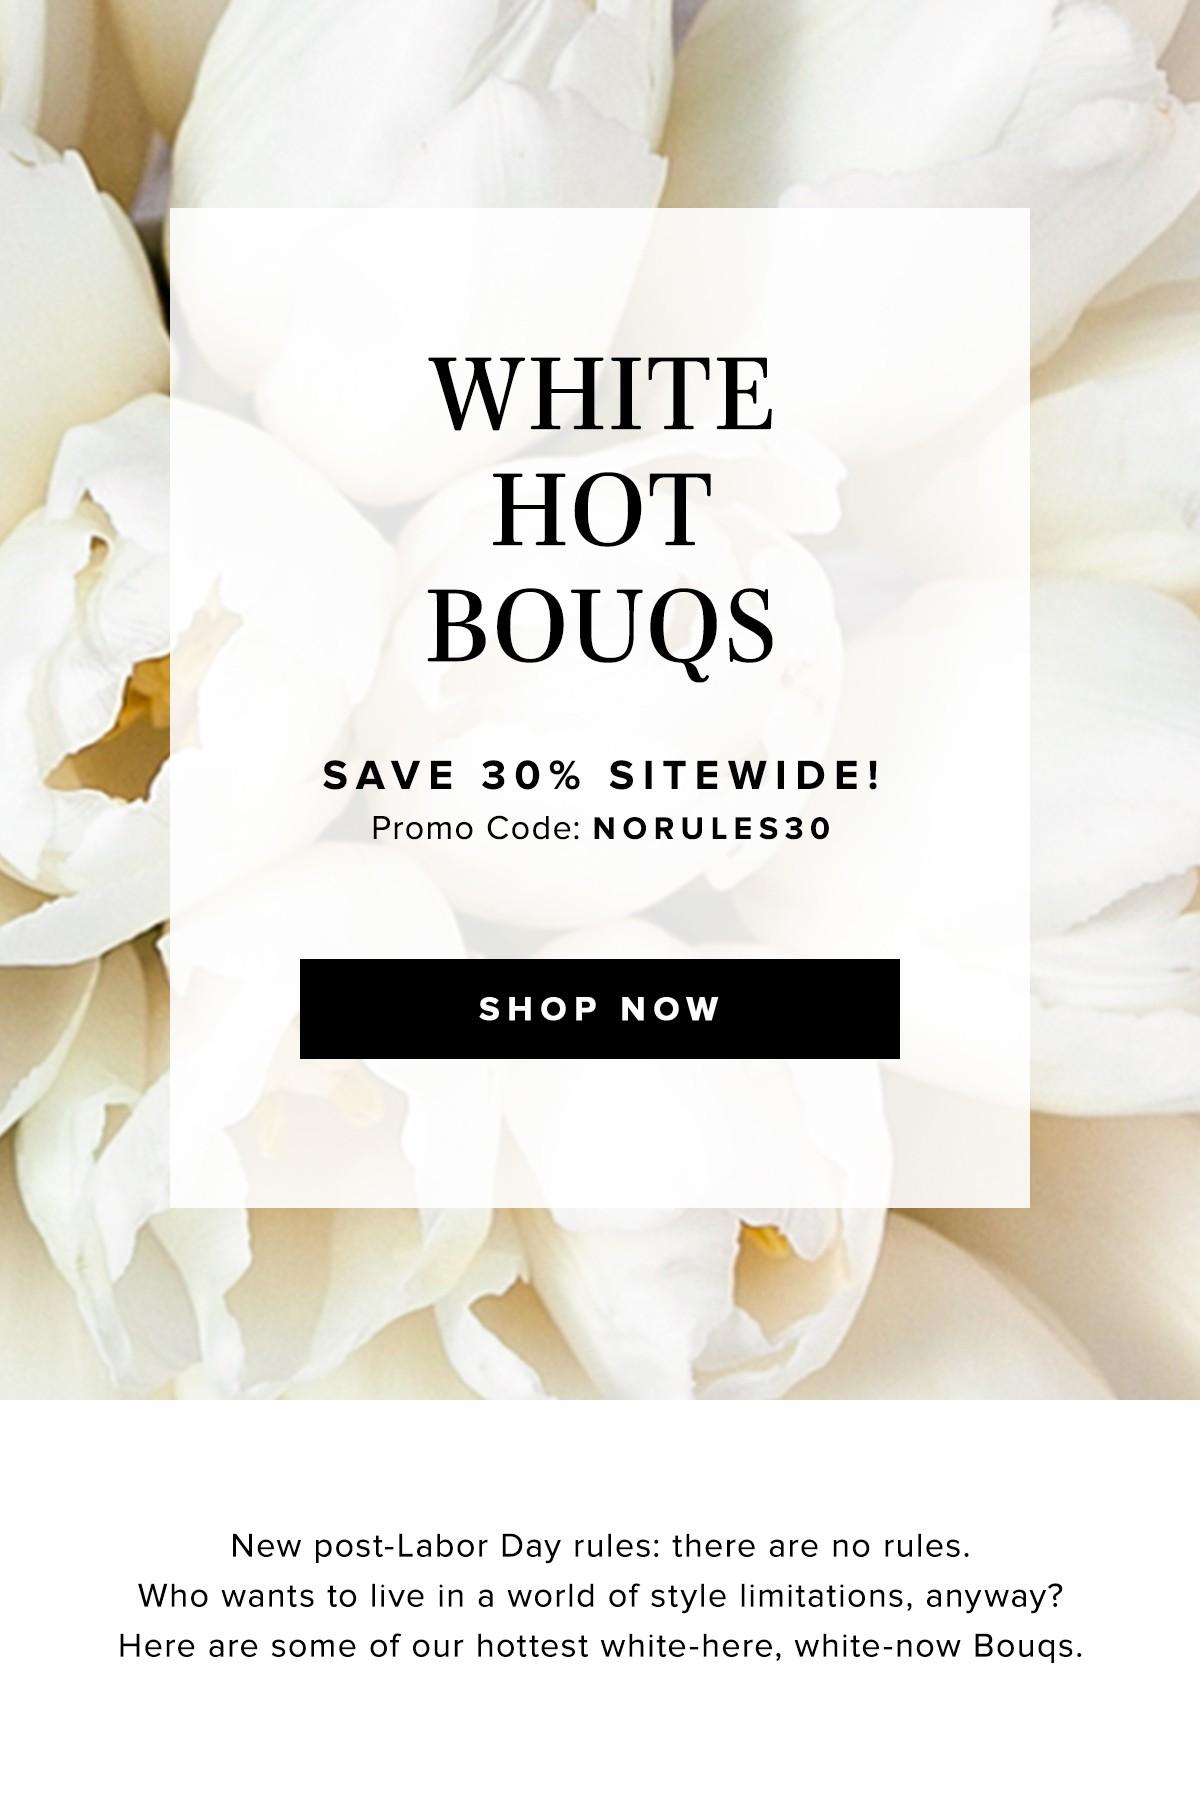 The Bouqs – 30% Off Sitewide!